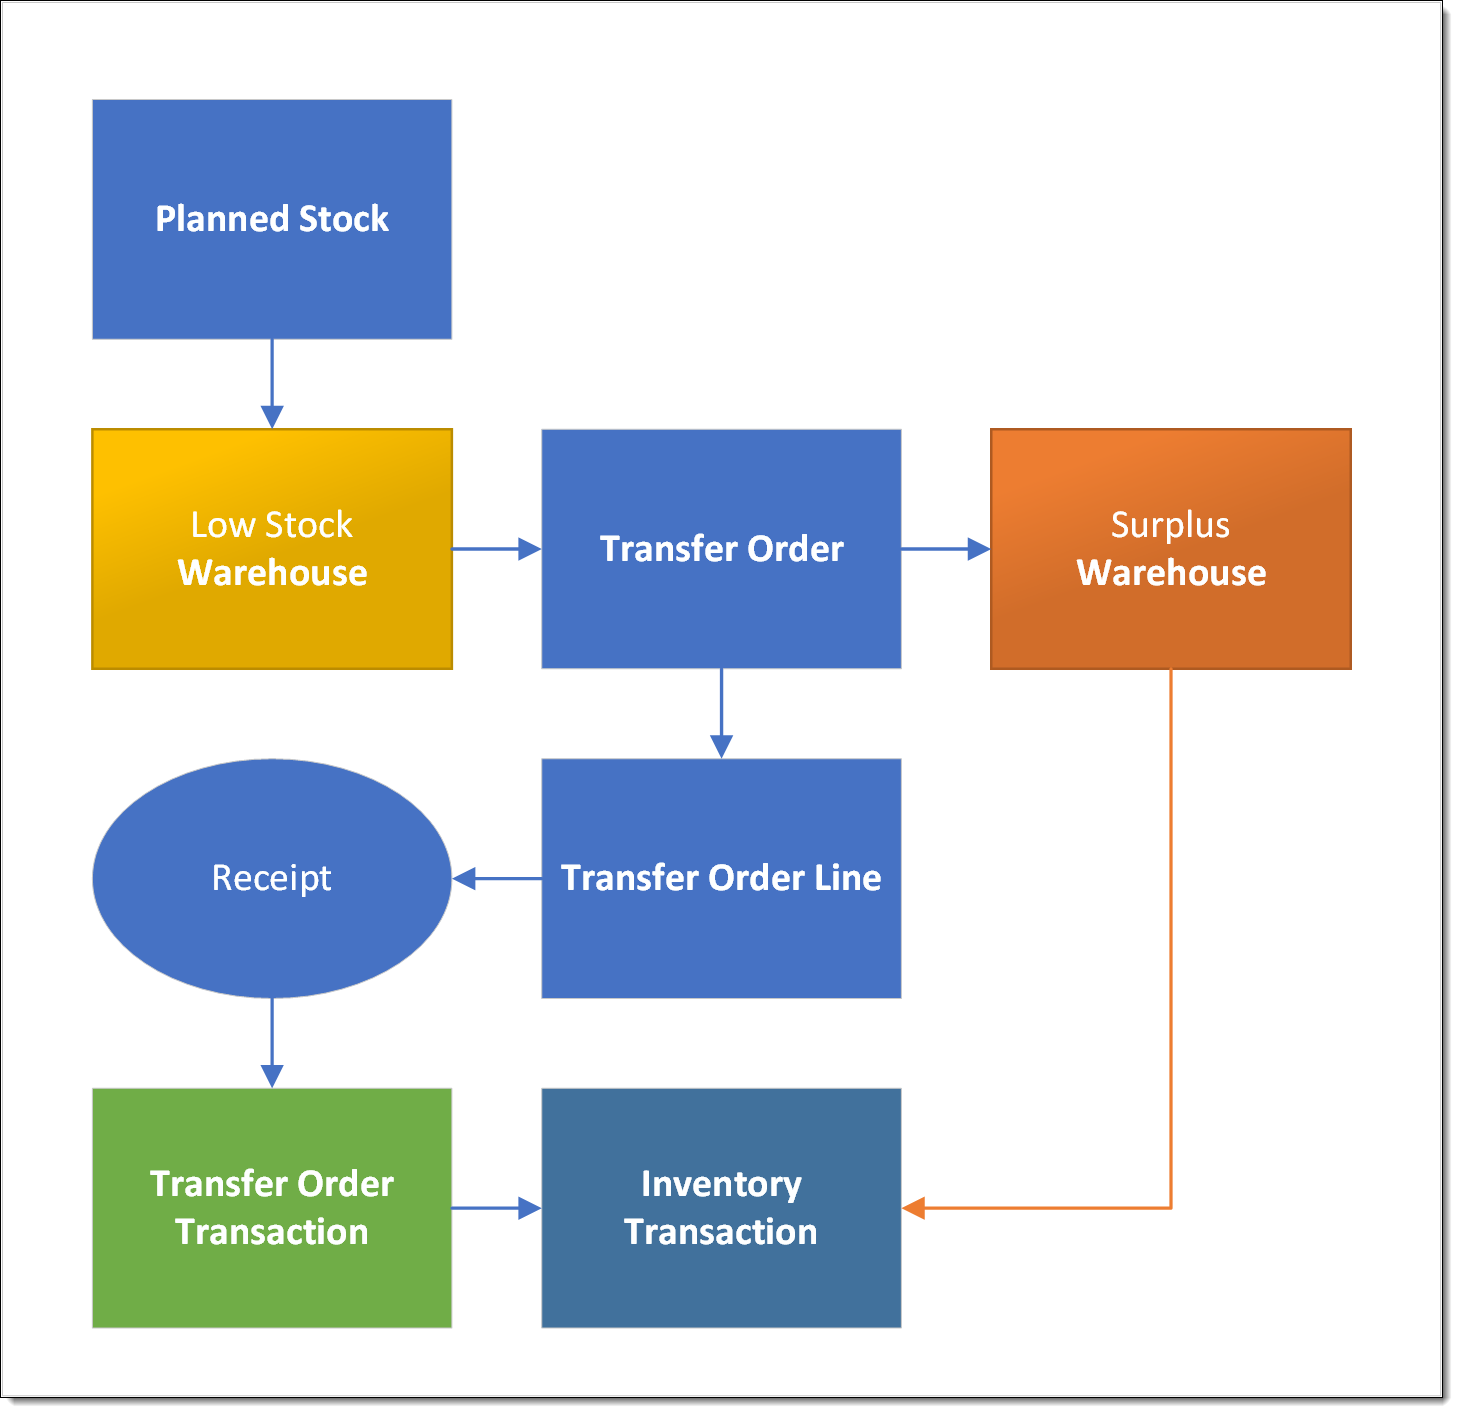 Flowchart indicating the planned stock transfer request process